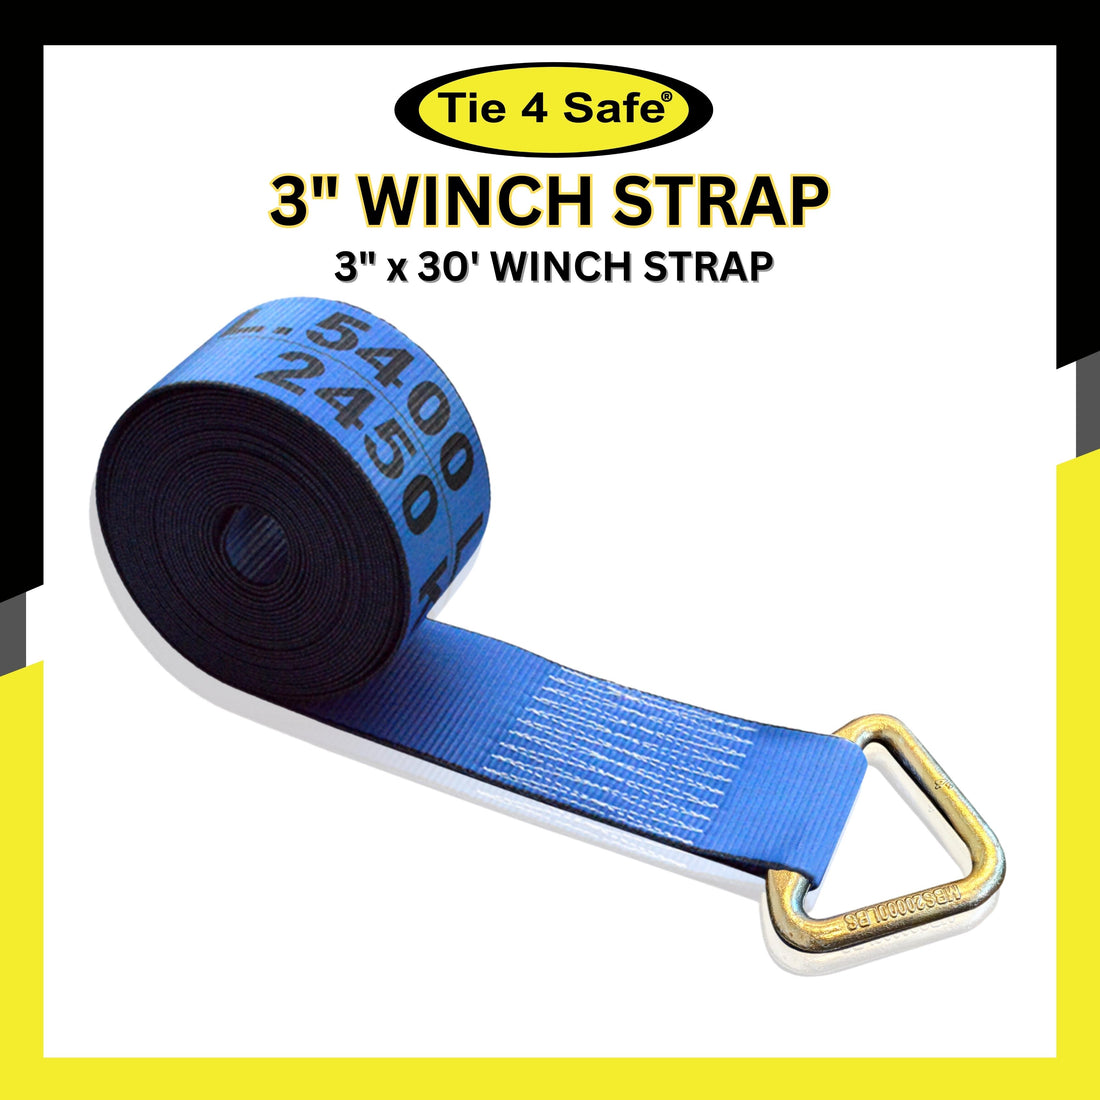 3" x 30' Winch Strap With Delta Ring